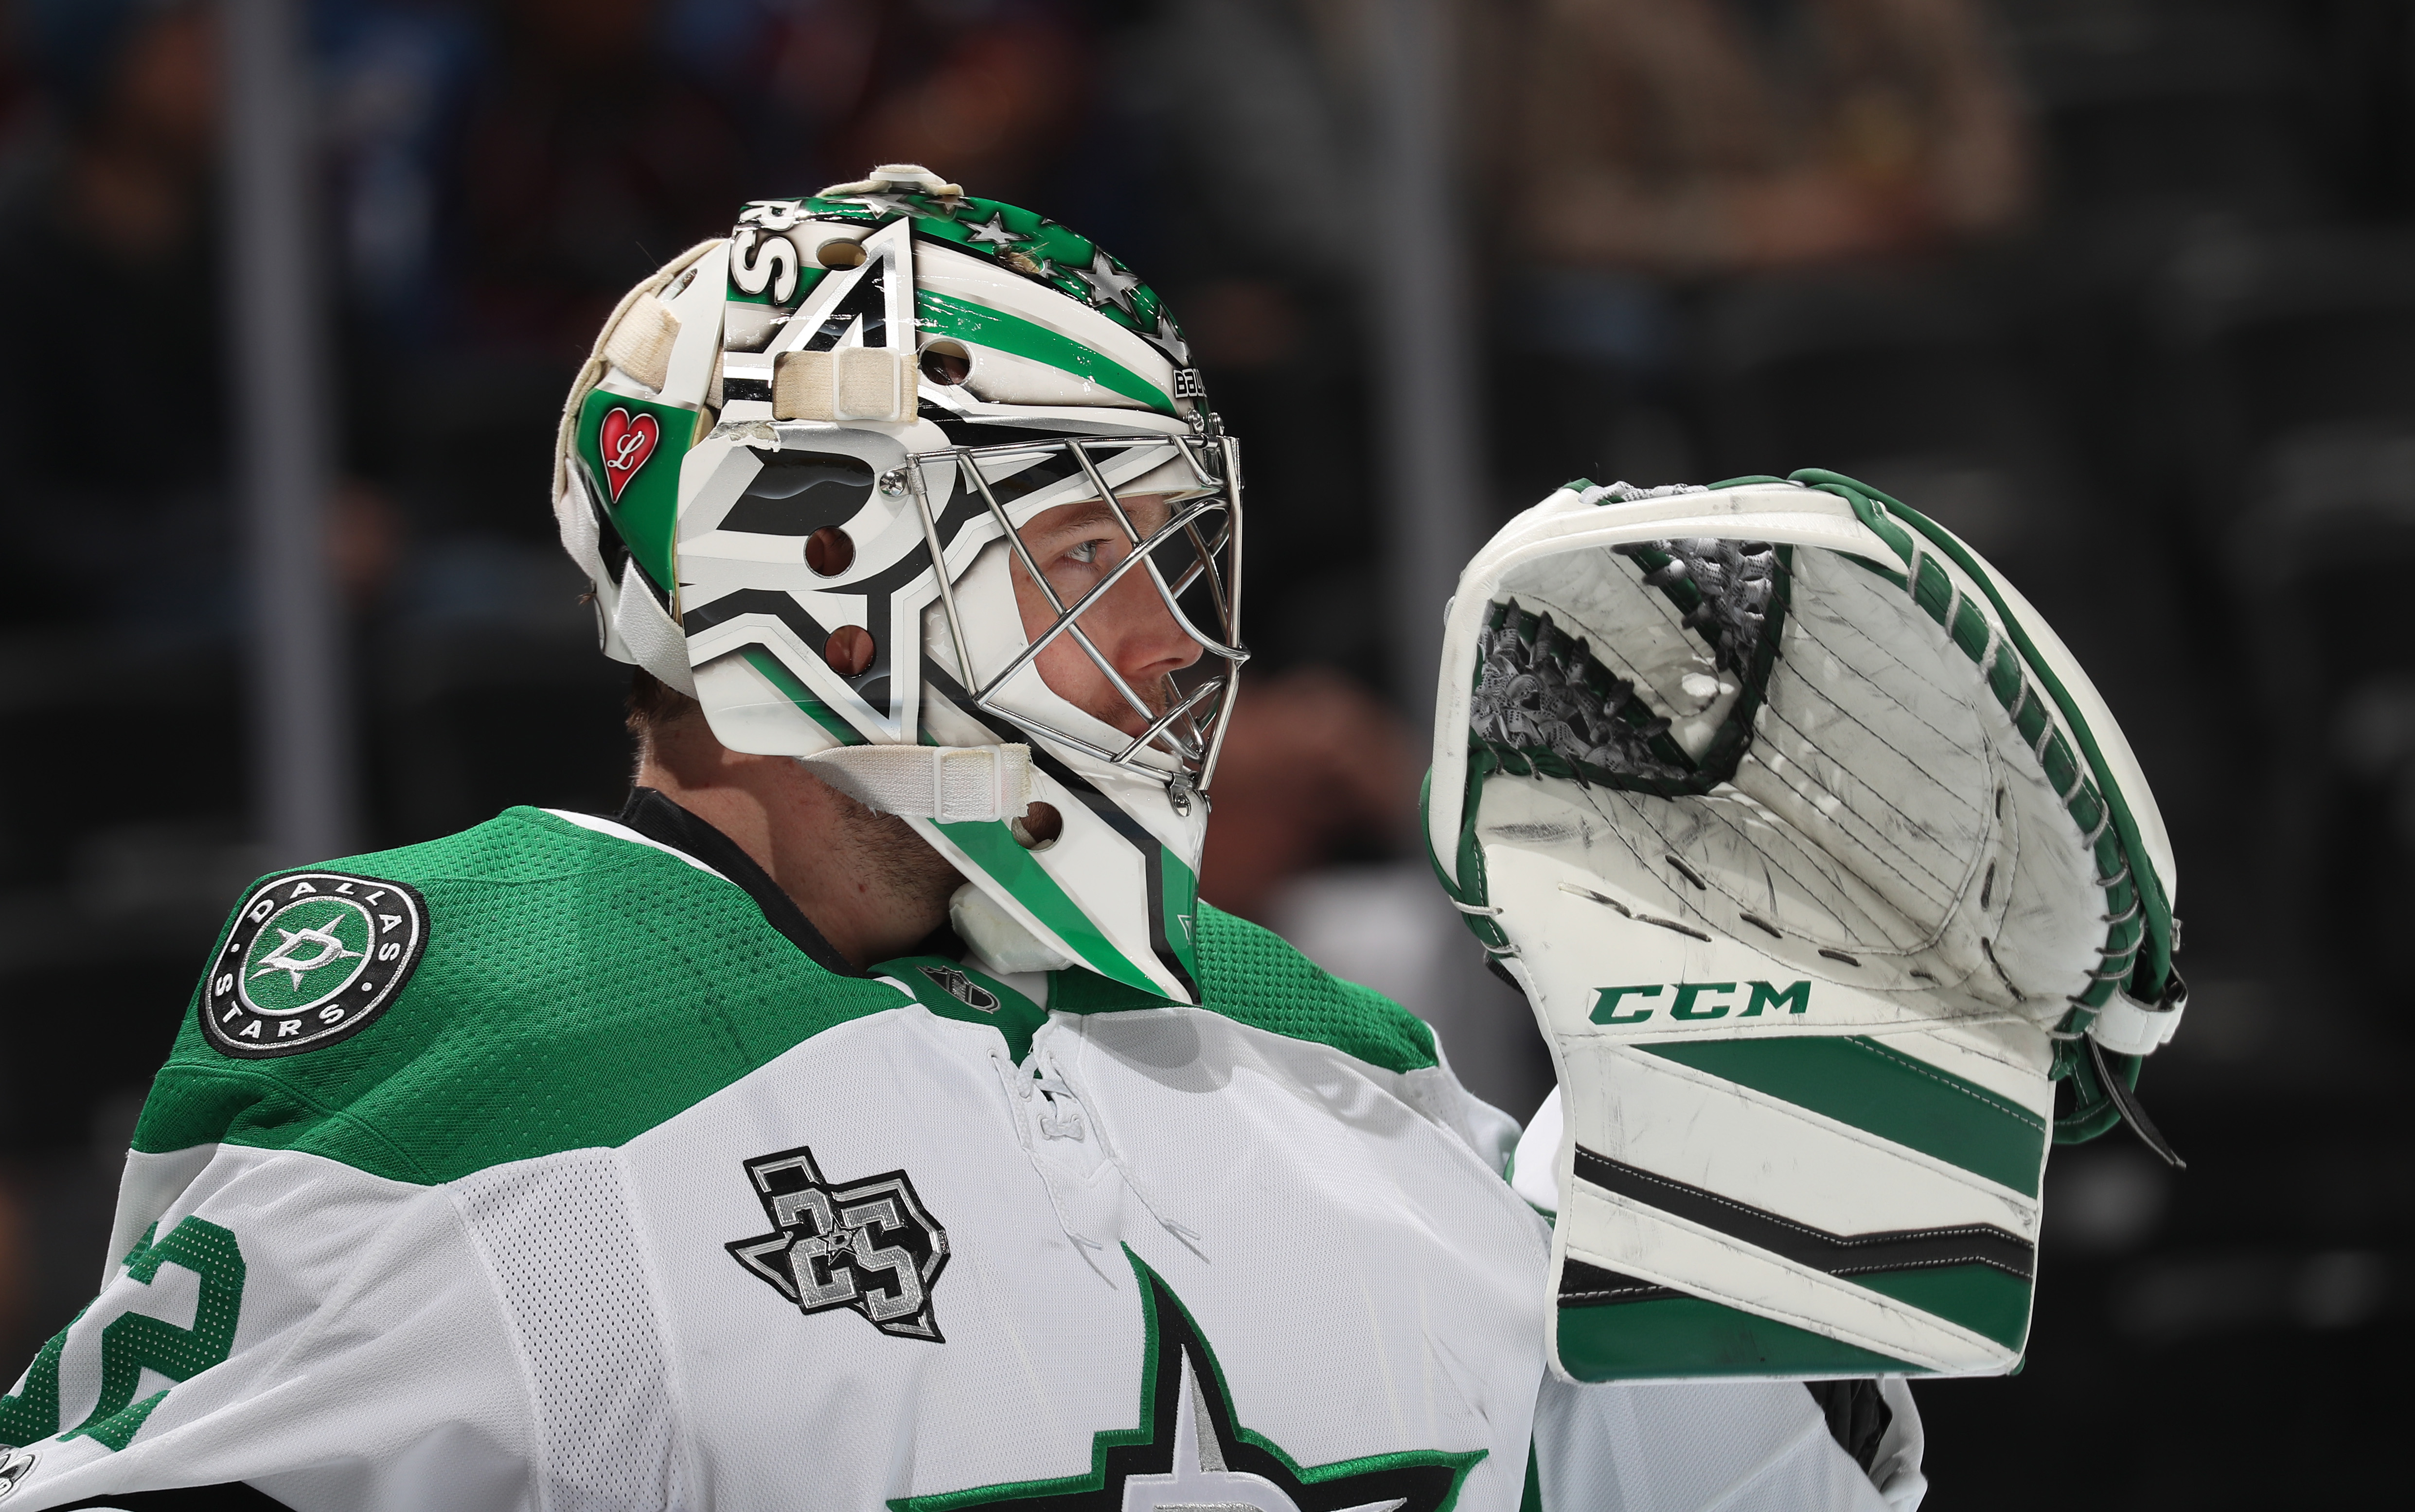 Dallas Stars Finally Have a Clearer Goaltending Picture